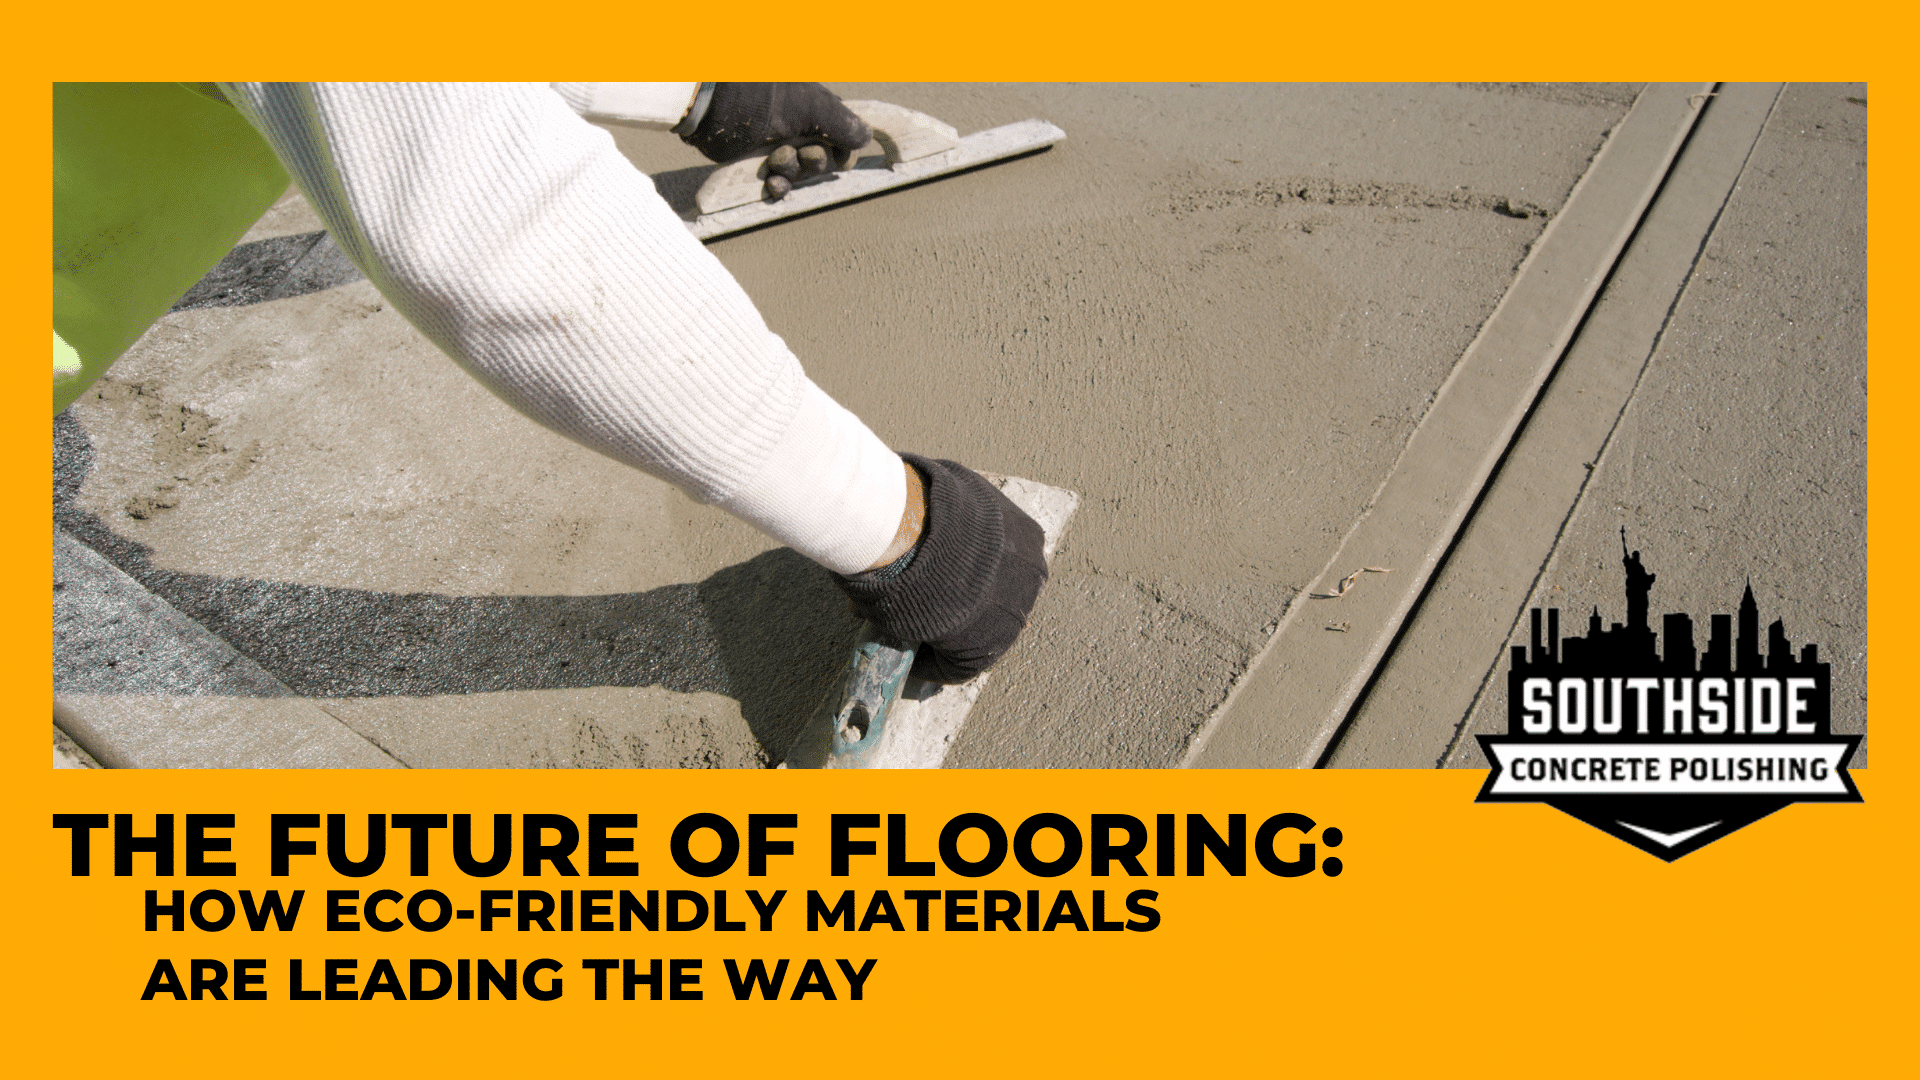 The Future of Flooring: How Eco-Friendly Materials are Leading the Way 9